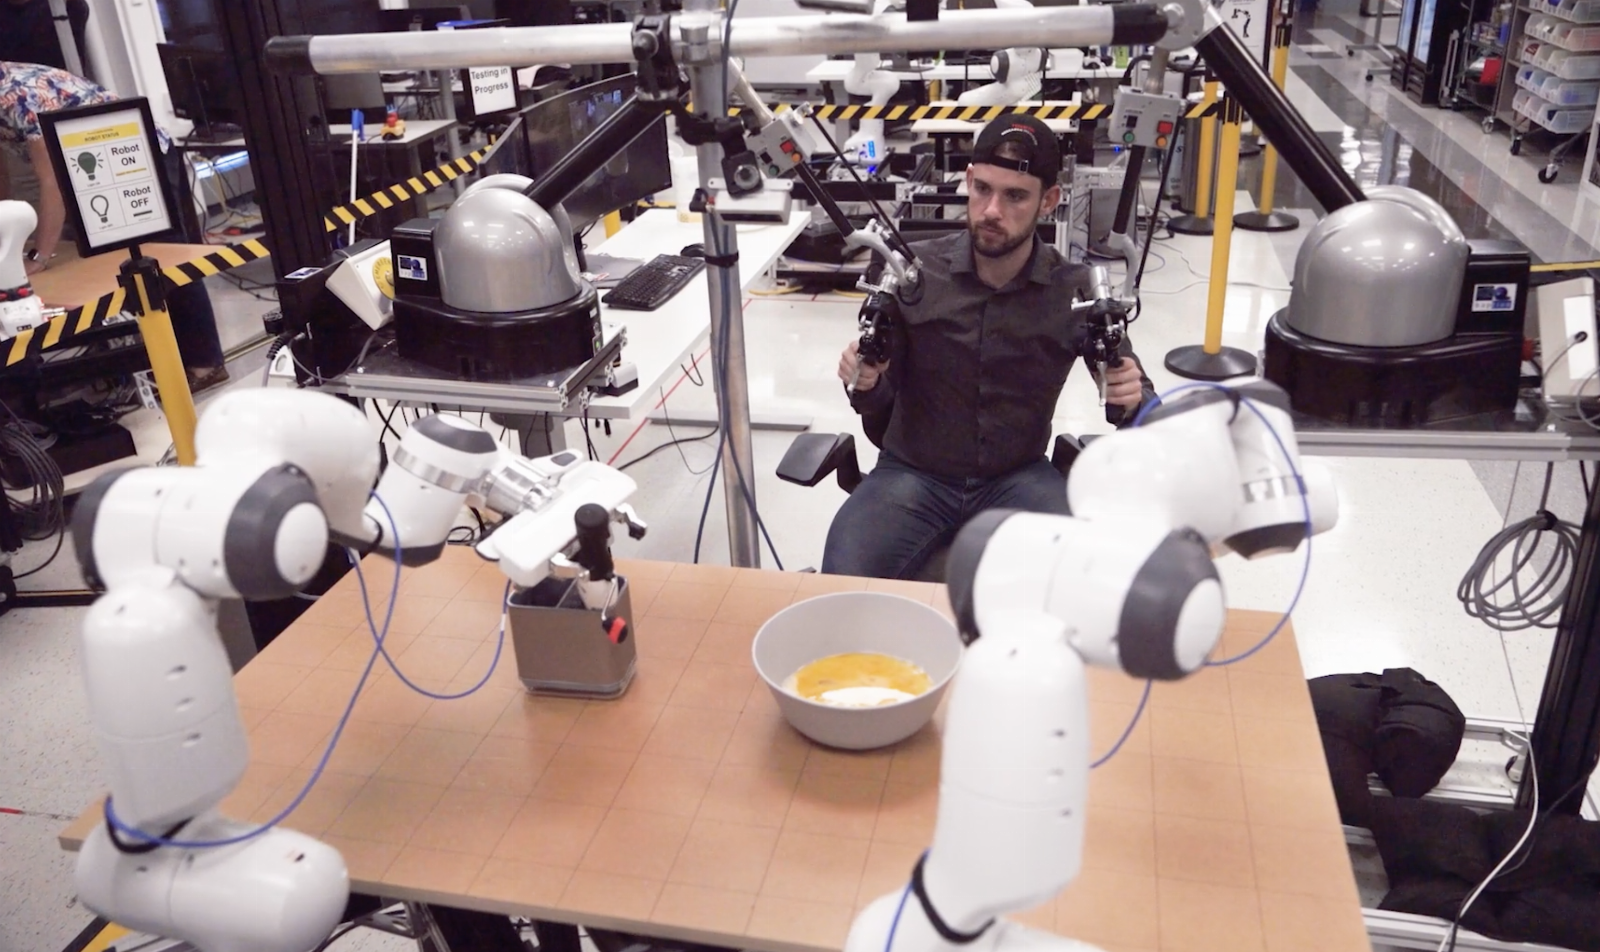 TRI is developing a new method to teach robots overnight